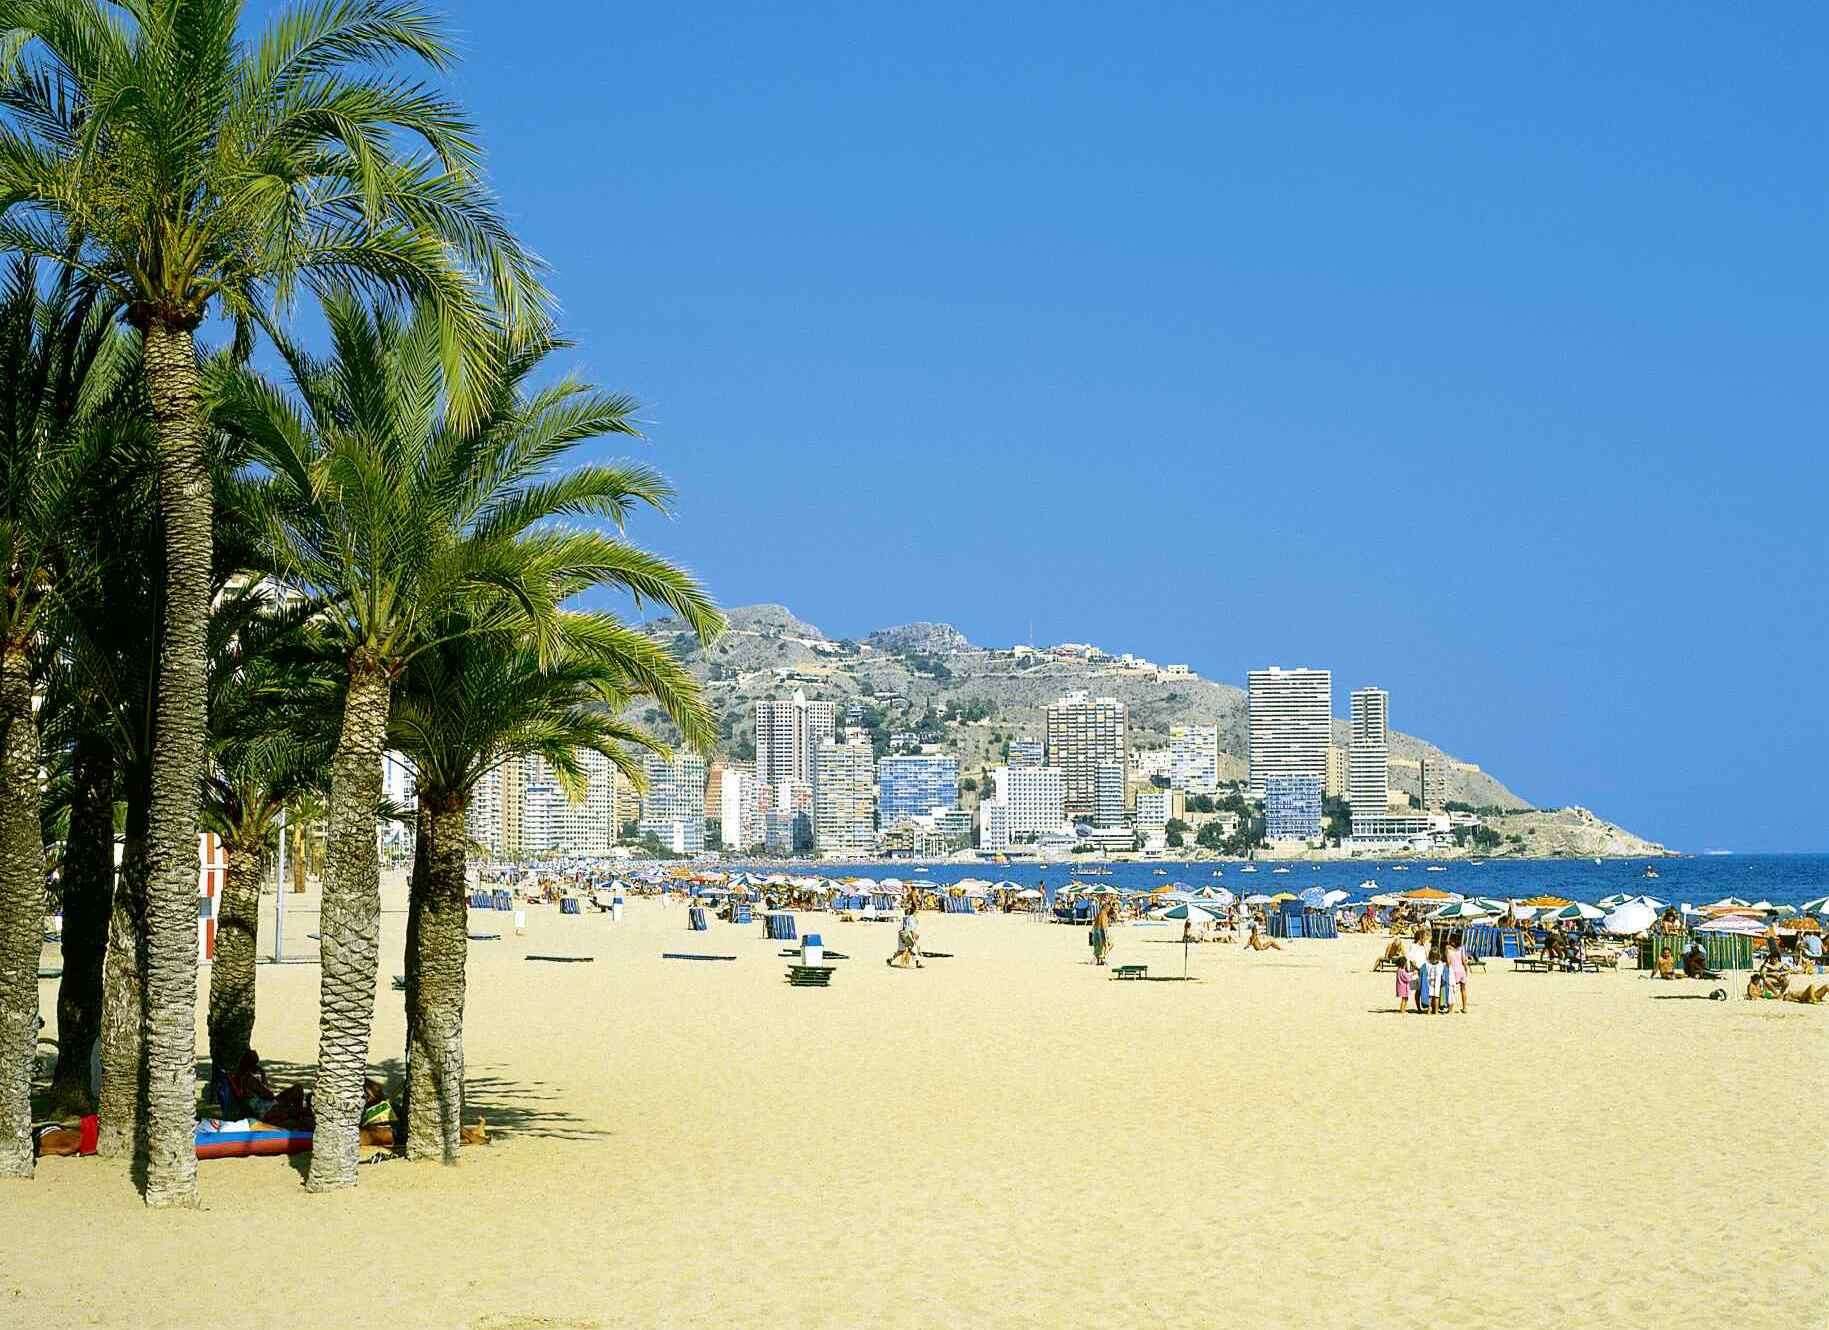 People arriving in the UK from Majorca will have to self-isolate, but the island is among those exempt from government advice against all but essential travel